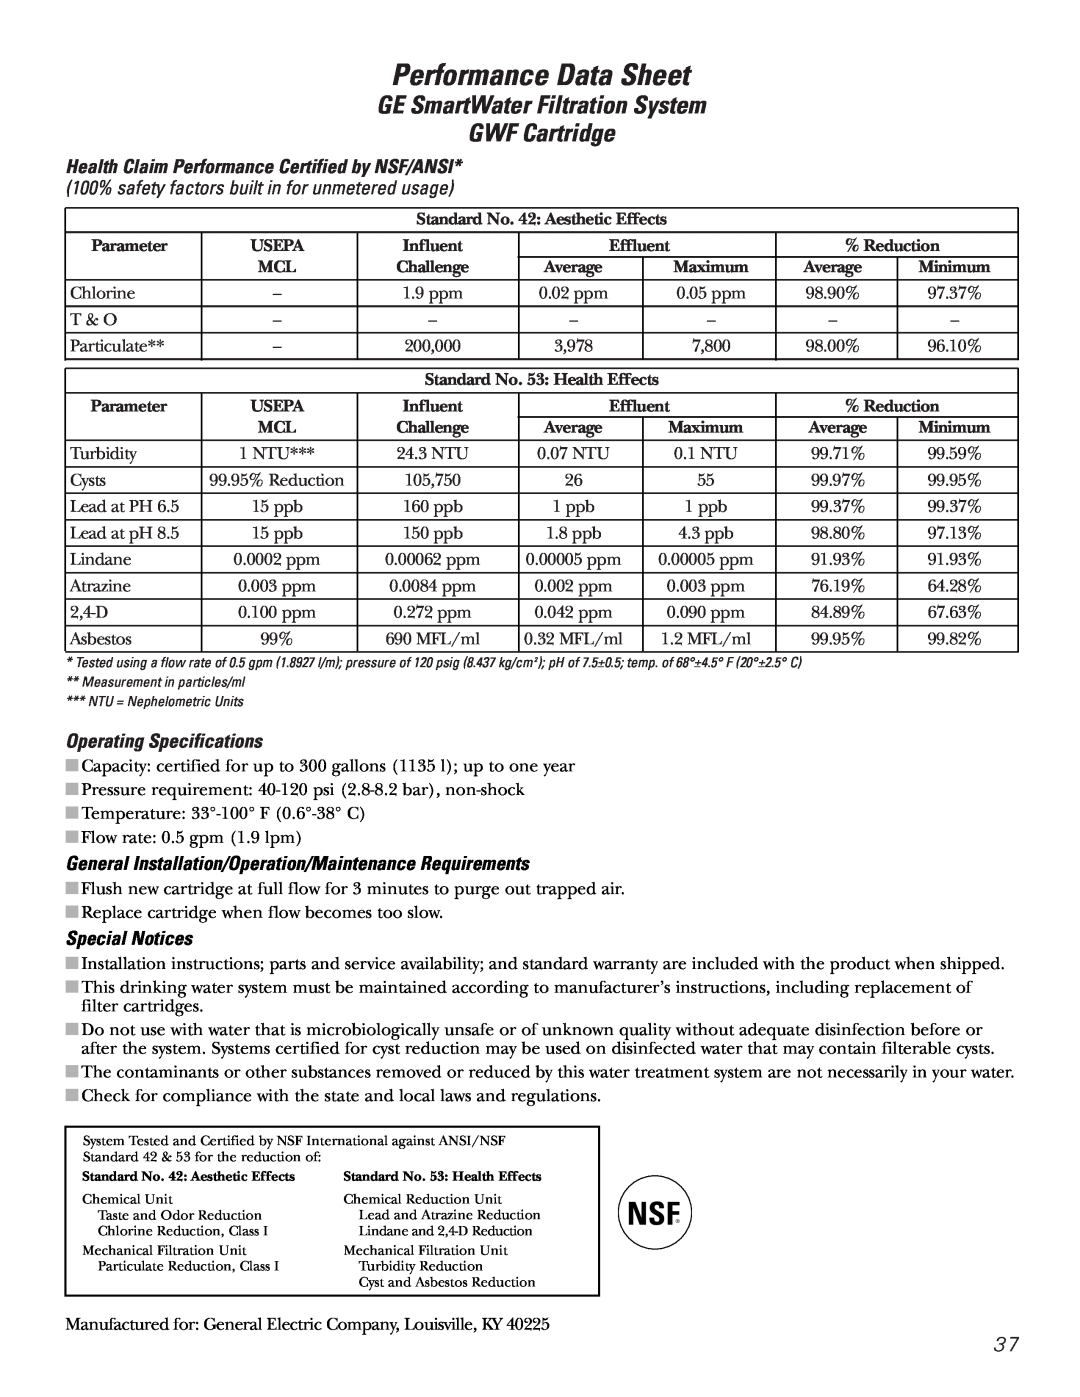 GE 200D2600P010 Performance Data Sheet, GE SmartWater Filtration System GWF Cartridge, Operating Specifications 